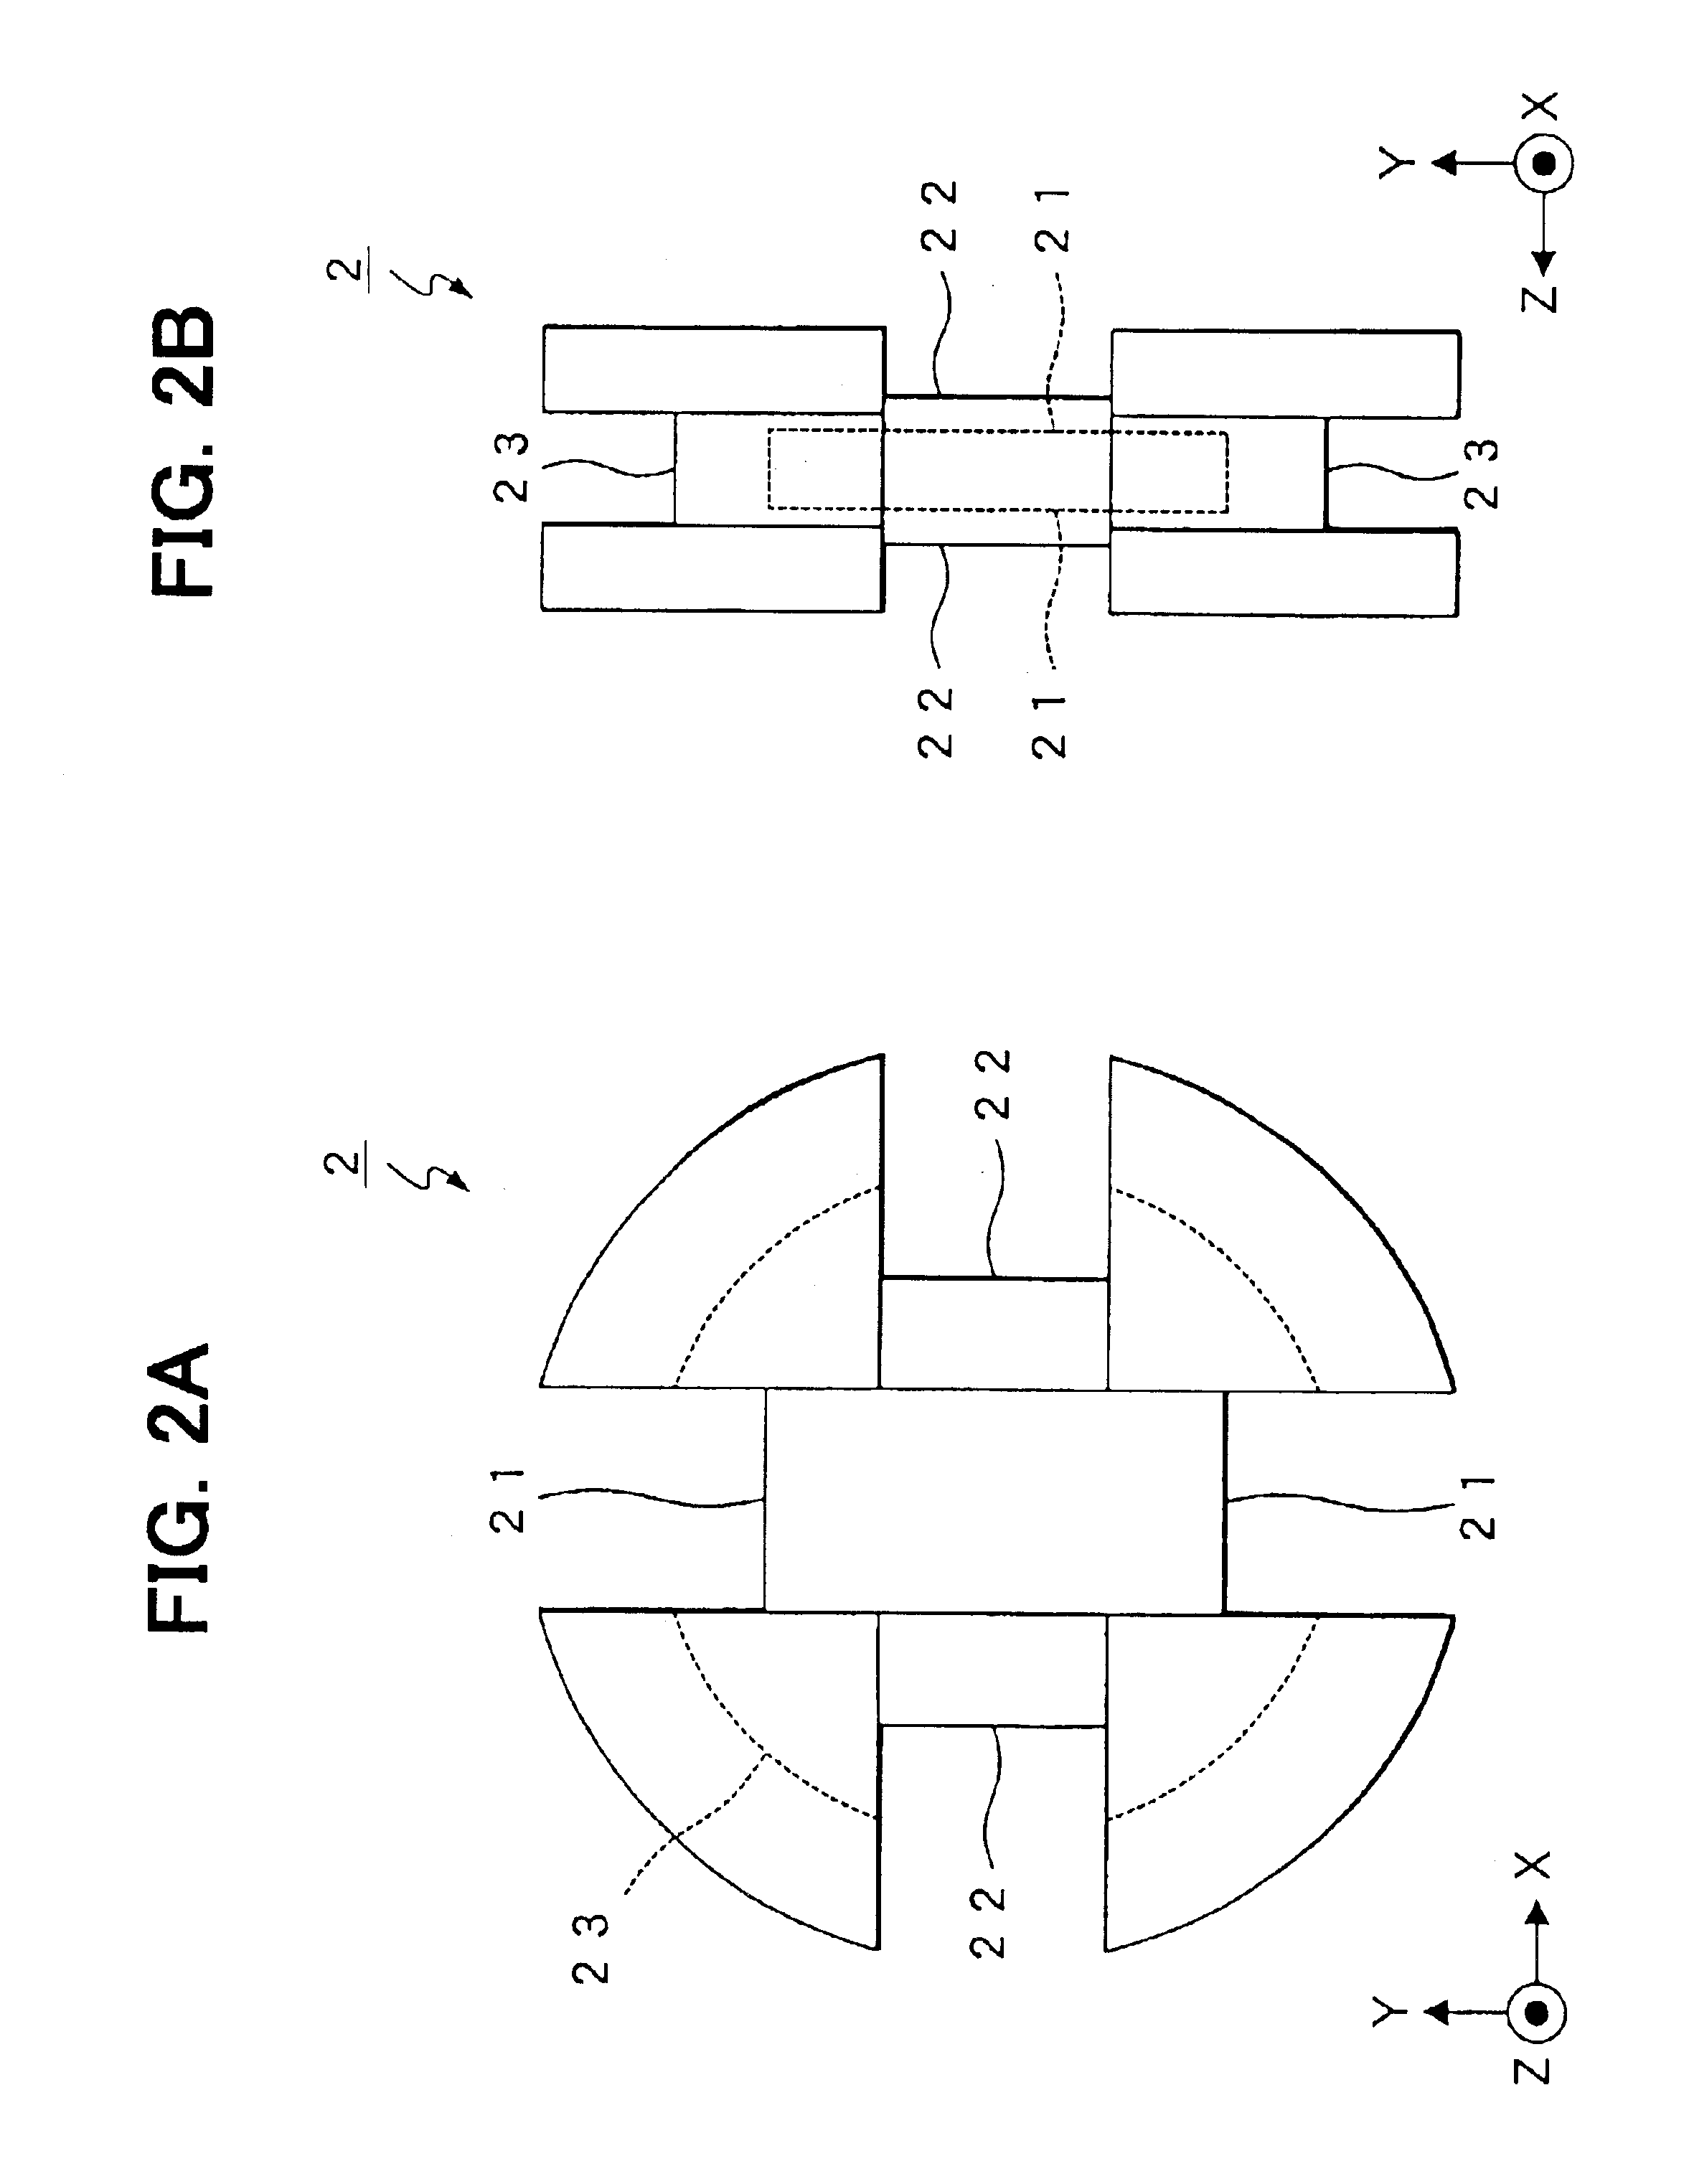 Reception antenna, core, and portable device